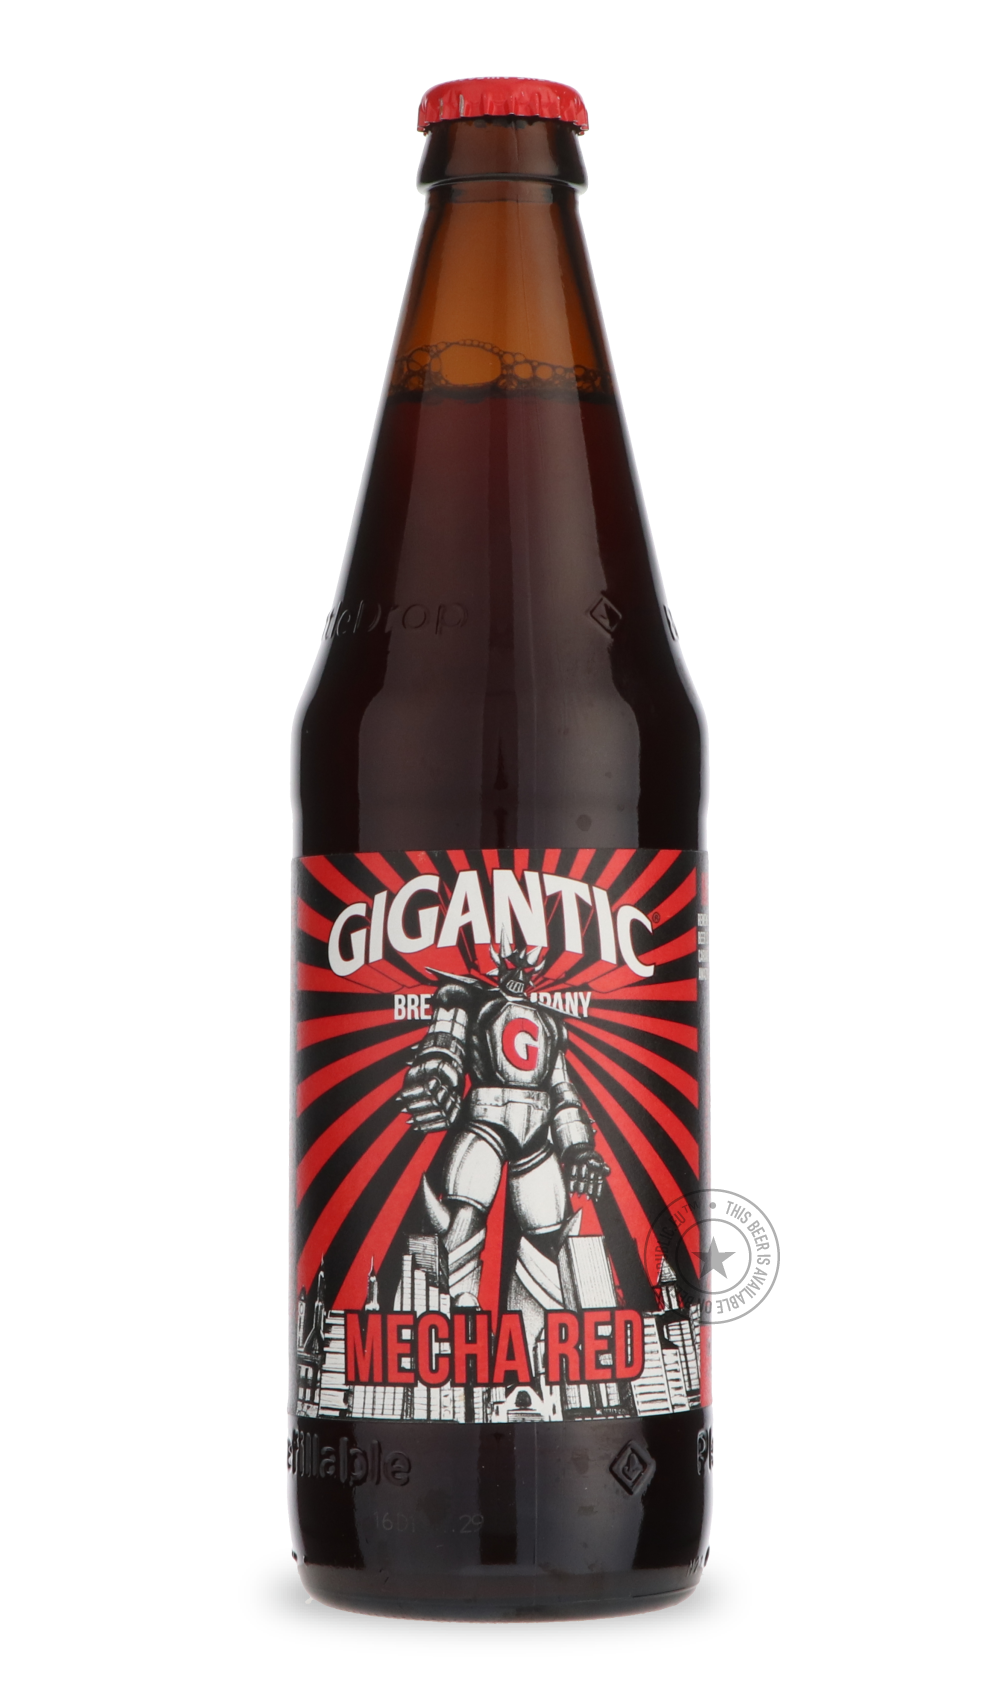 -Gigantic- Mecha Red-Brown & Dark- Only @ Beer Republic - The best online beer store for American & Canadian craft beer - Buy beer online from the USA and Canada - Bier online kopen - Amerikaans bier kopen - Craft beer store - Craft beer kopen - Amerikanisch bier kaufen - Bier online kaufen - Acheter biere online - IPA - Stout - Porter - New England IPA - Hazy IPA - Imperial Stout - Barrel Aged - Barrel Aged Imperial Stout - Brown - Dark beer - Blond - Blonde - Pilsner - Lager - Wheat - Weizen - Amber - Bar